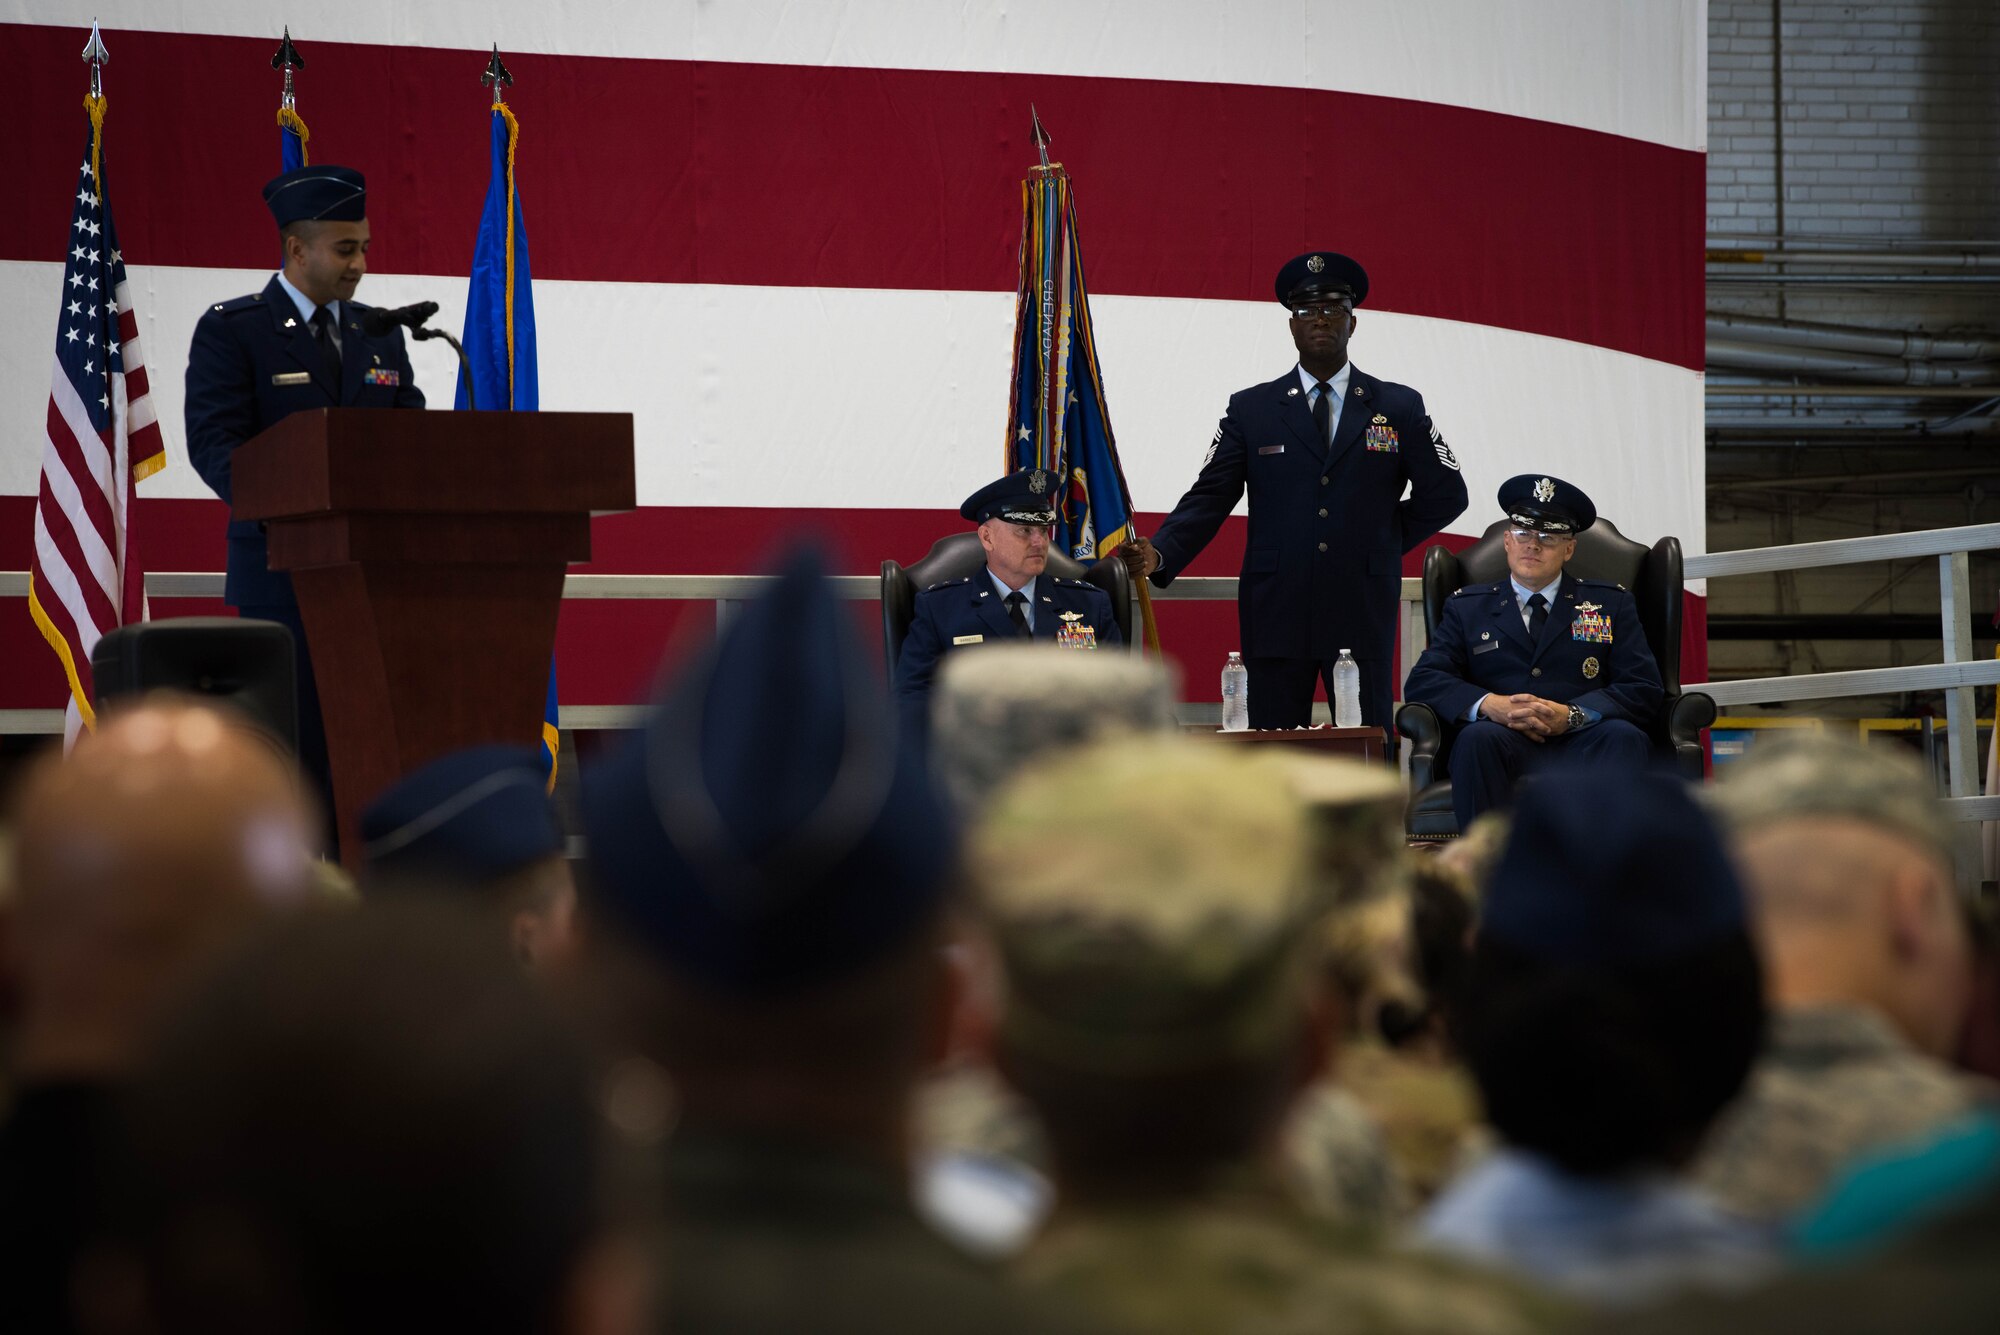 (U.S. Air Force photo by Staff Sgt. Michael Cossaboom)